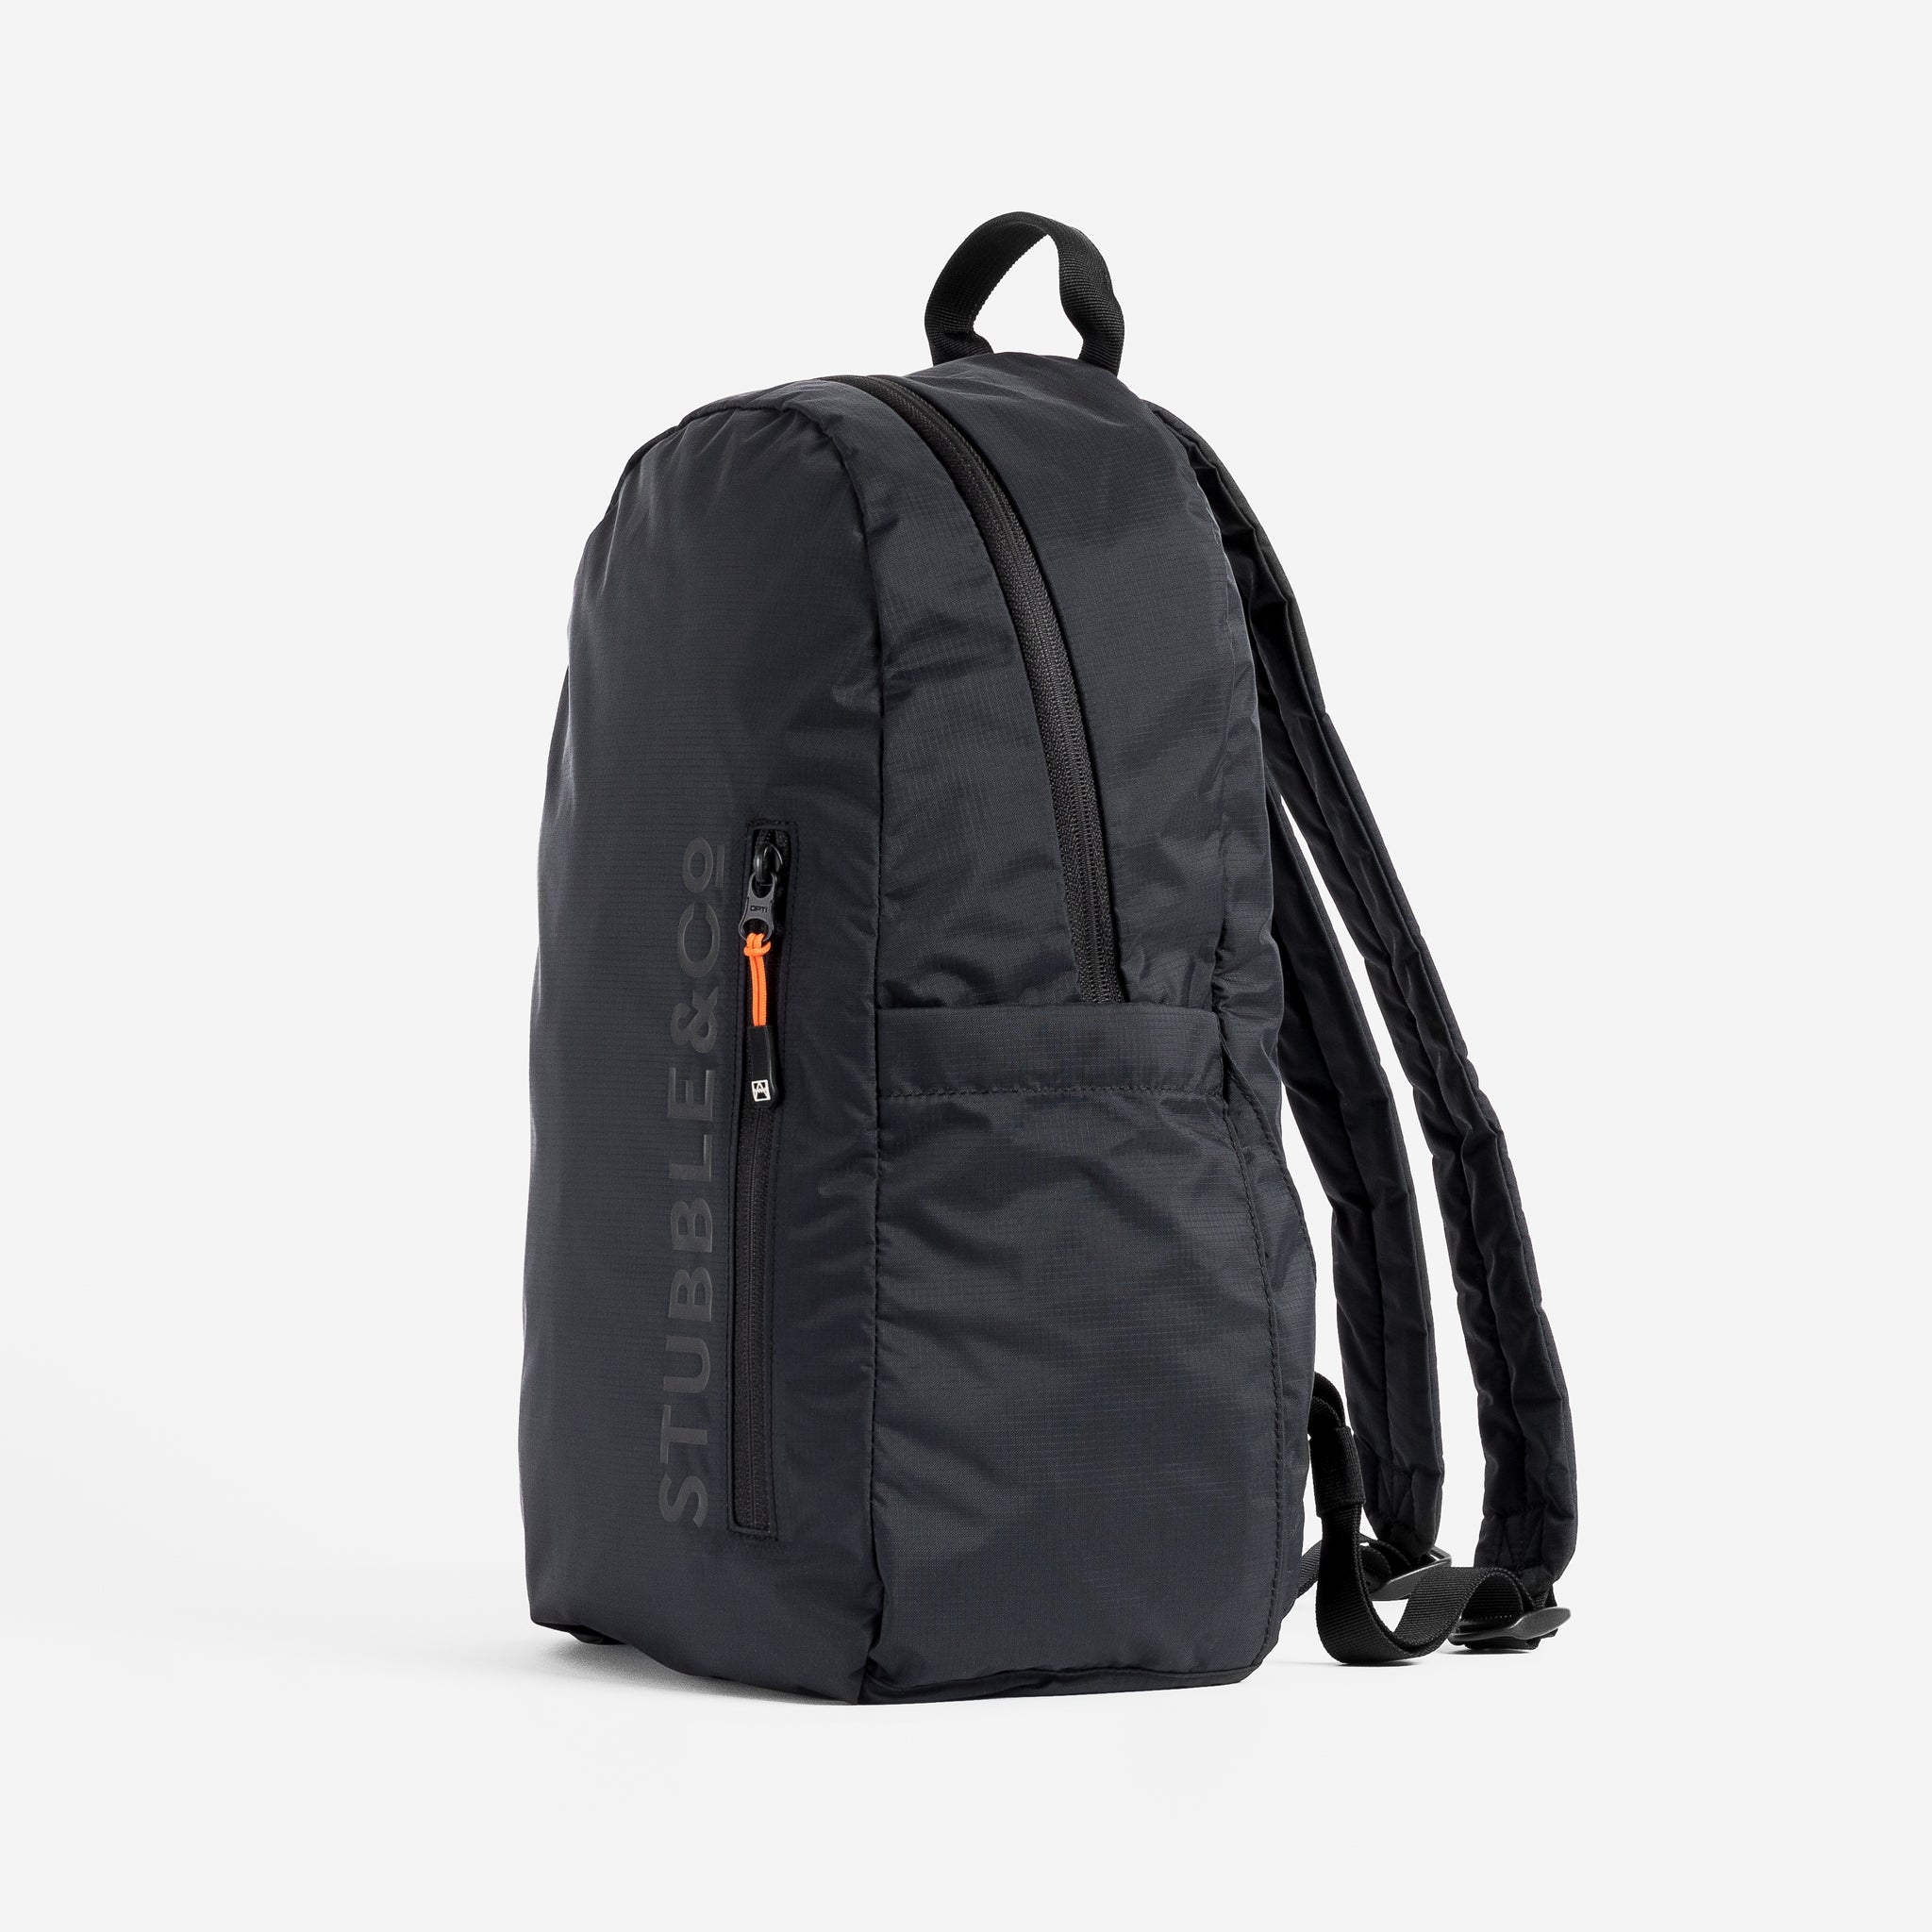 Side view of the packable All Black Ultra Light Backpack